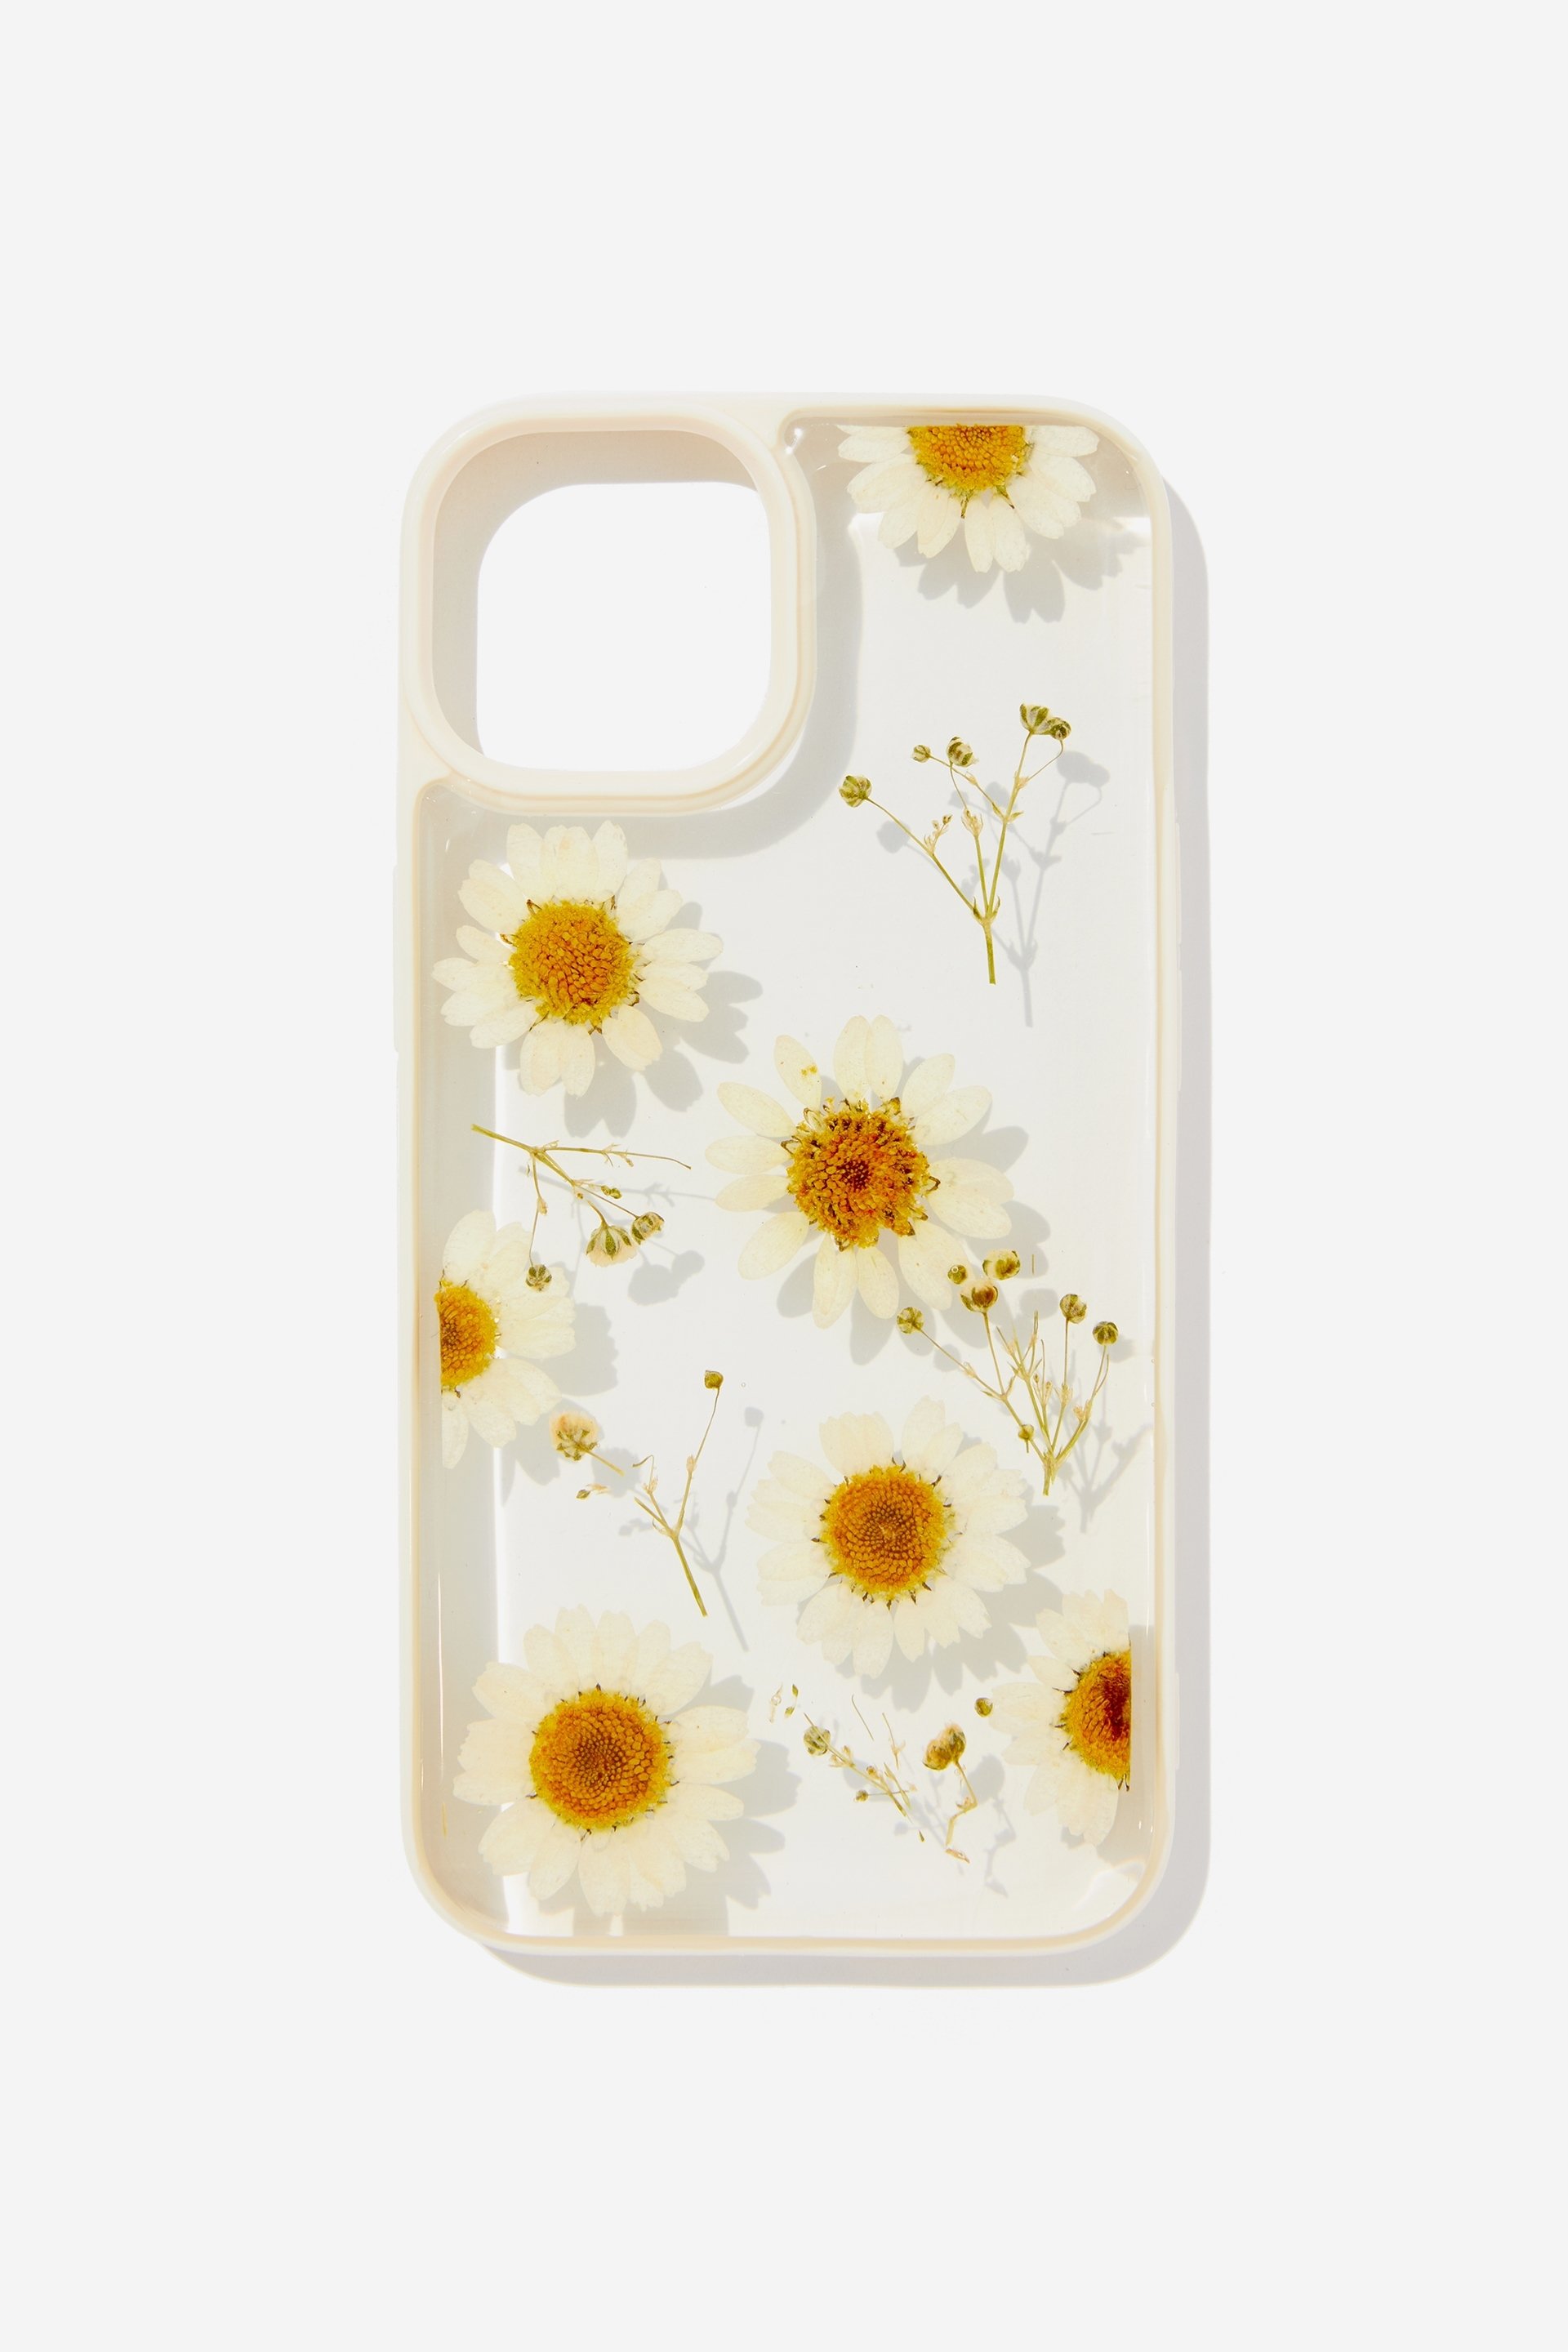 Typo - Snap On Protective Phone Case Iphone 13/14 - Trapped daisy / ecru